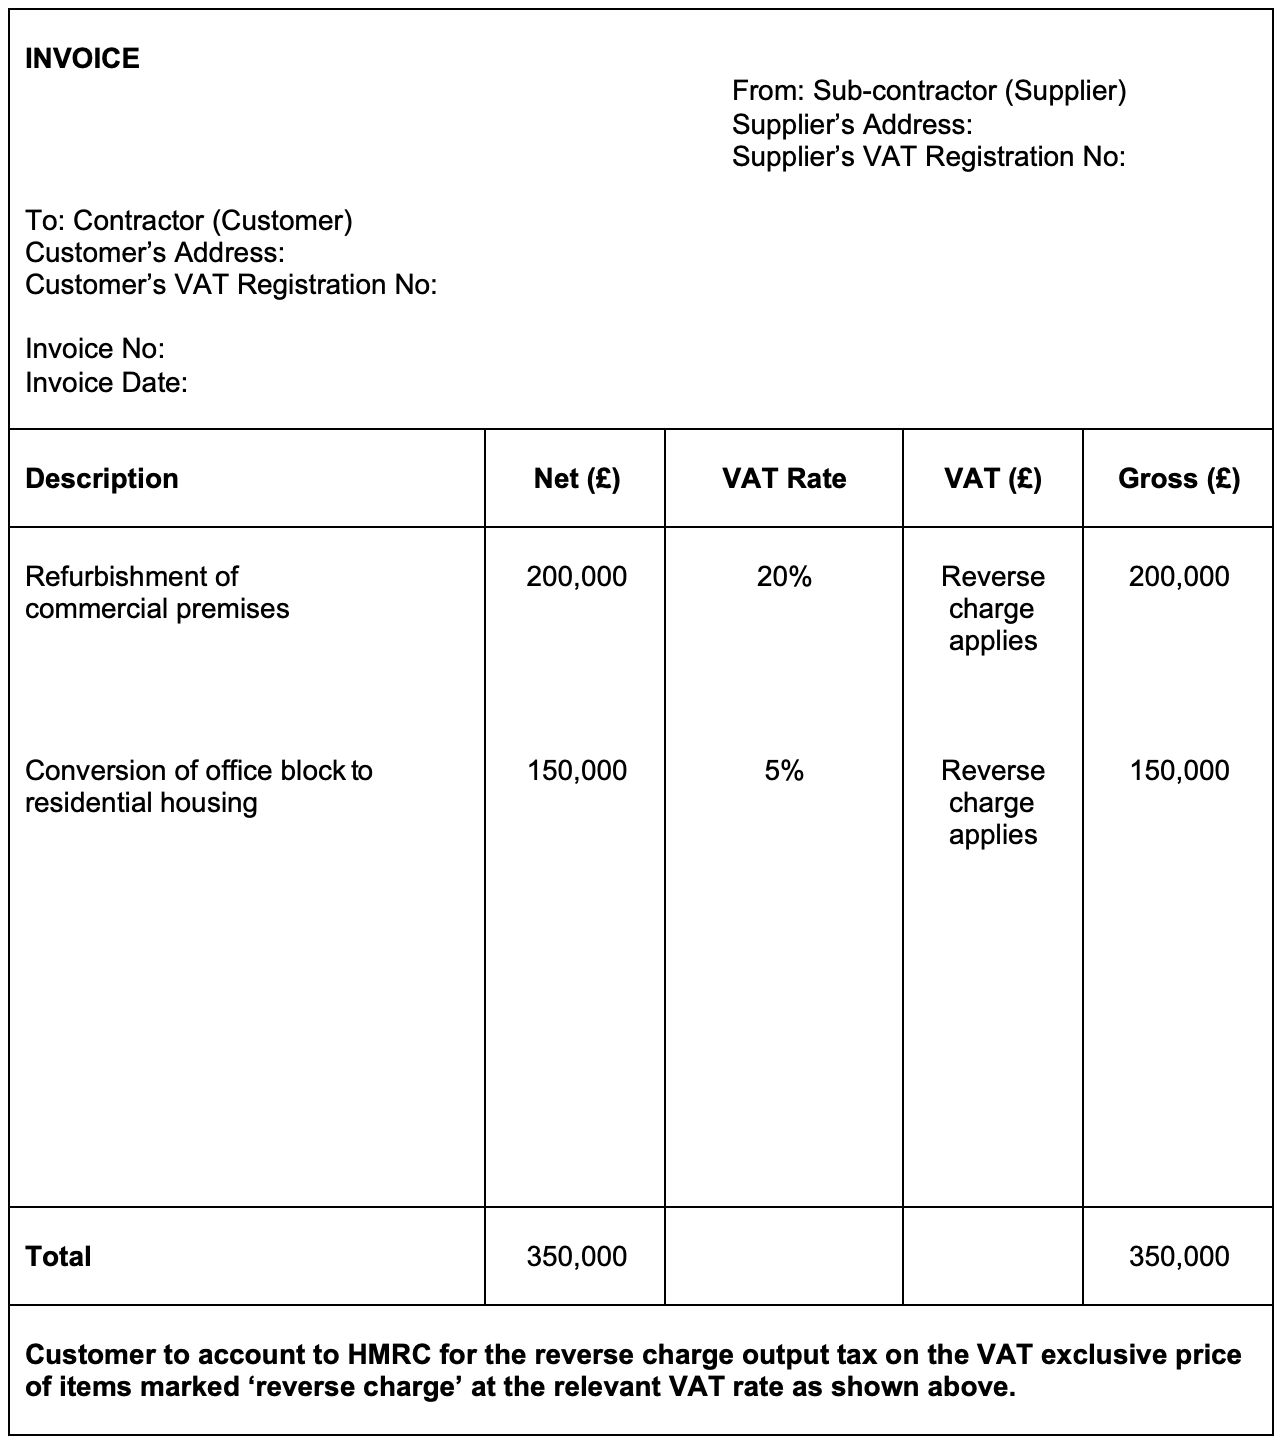 Example of a reverse charge invoice